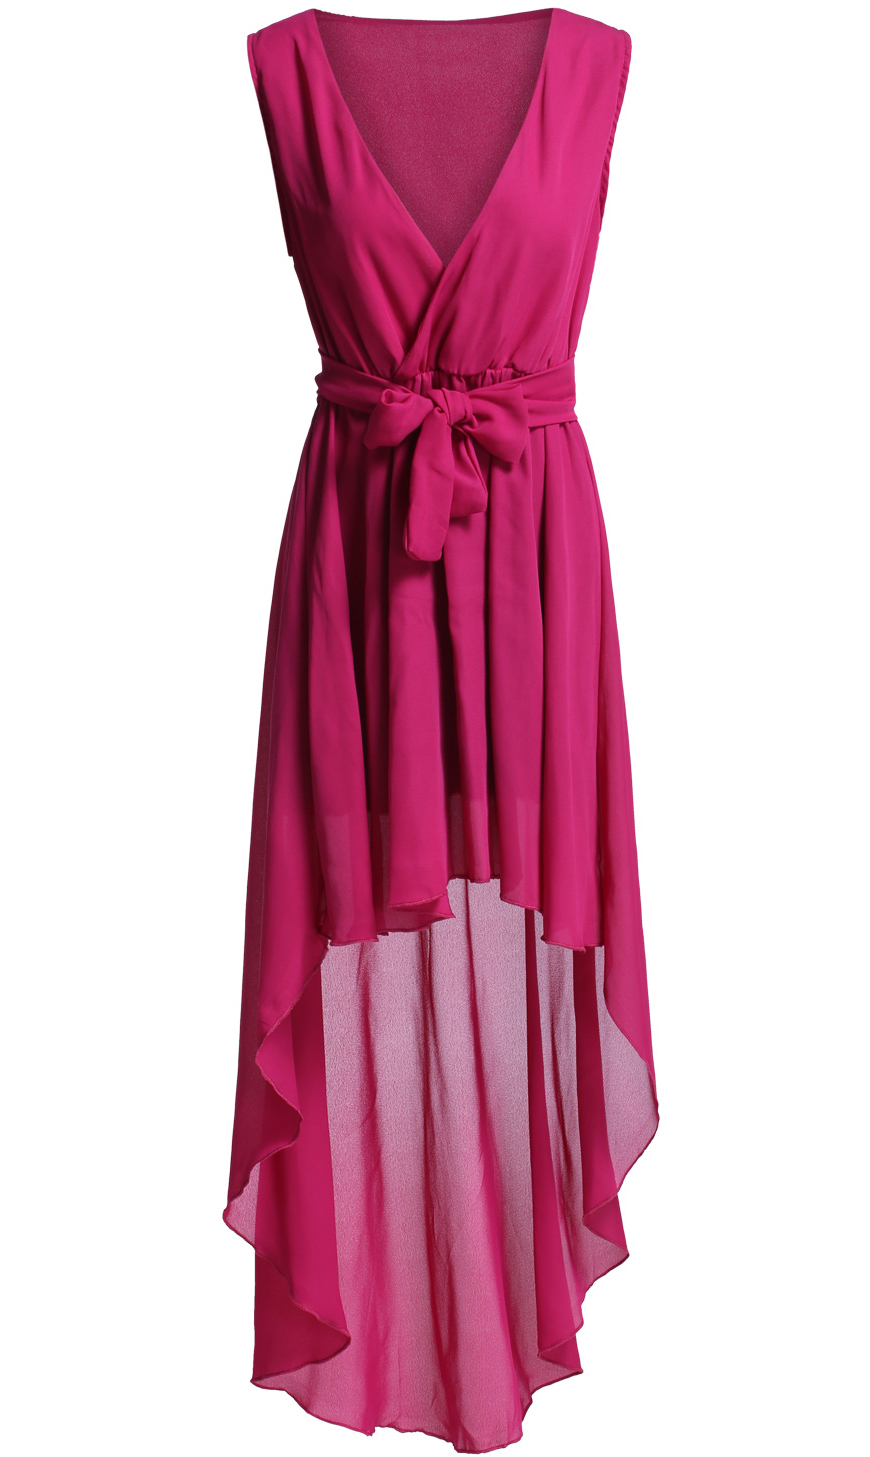 High Neck Tie Dress & Help You Stand Out